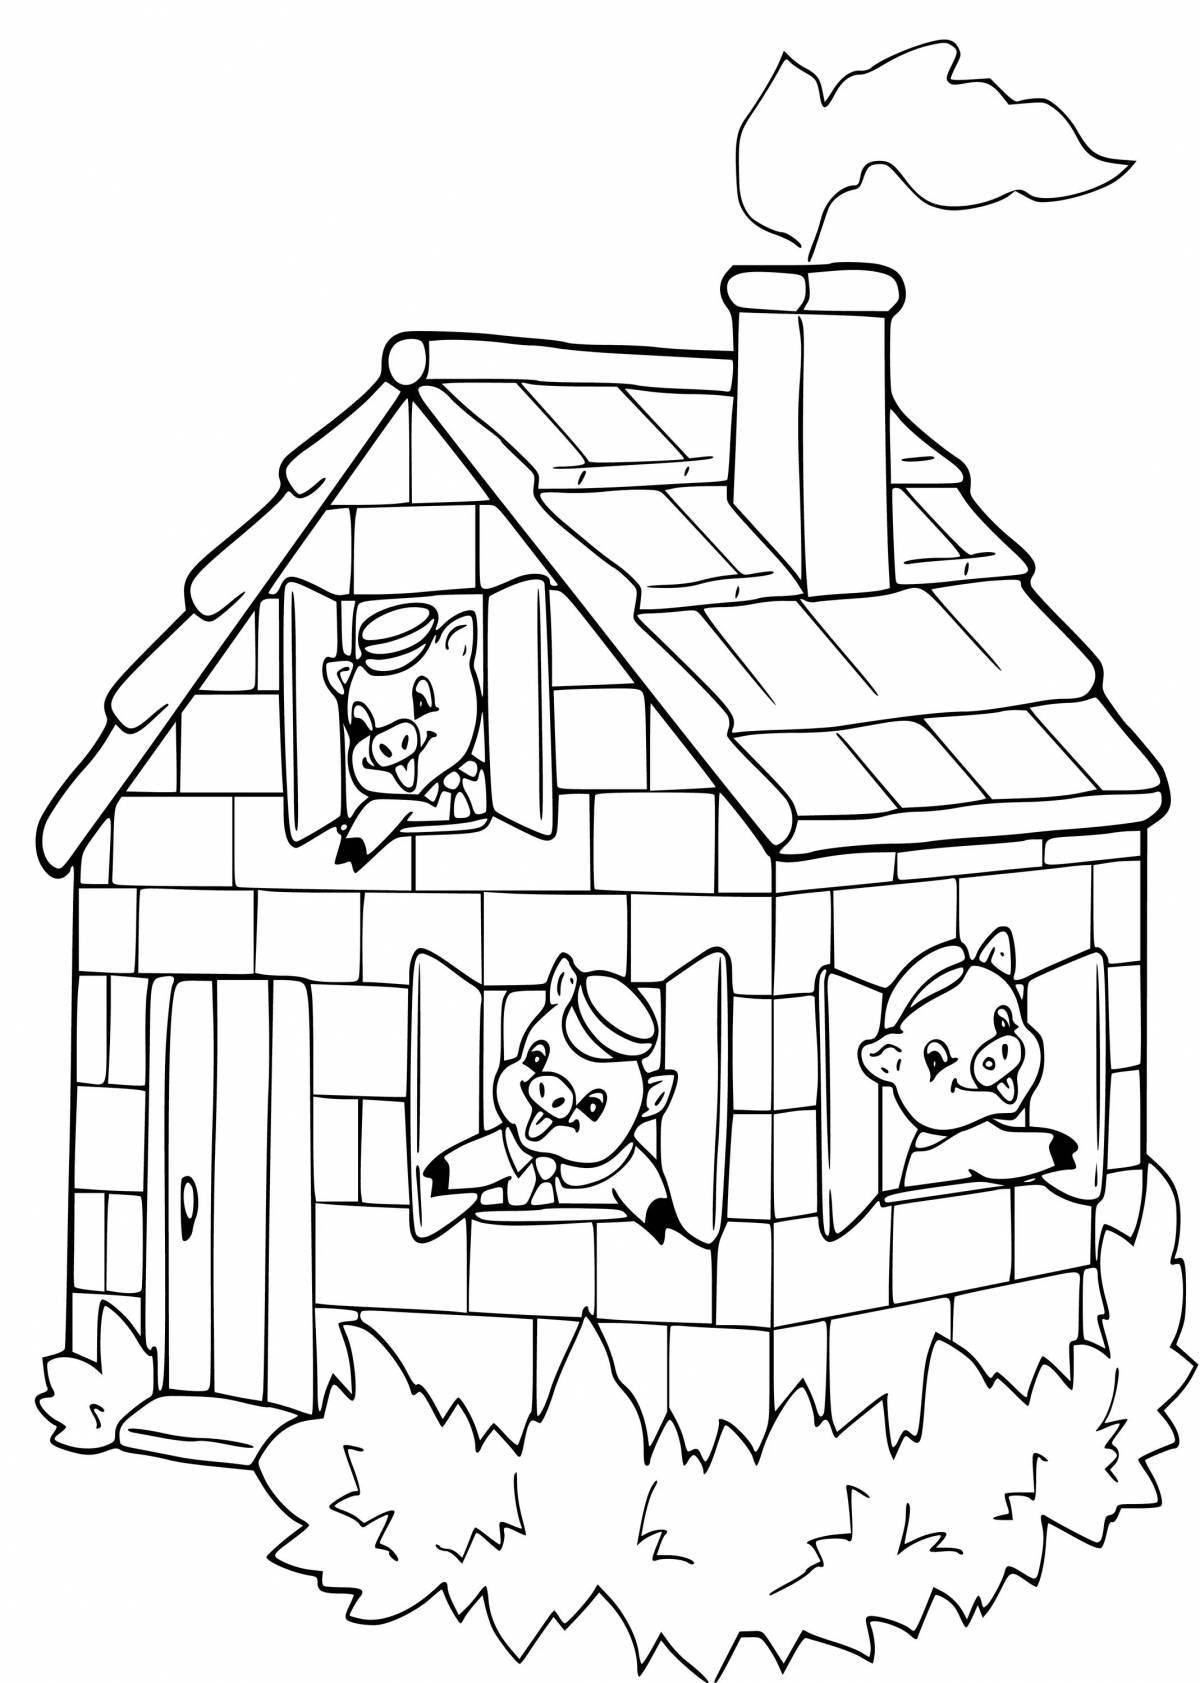 Coloring book cute tale of the three little pigs